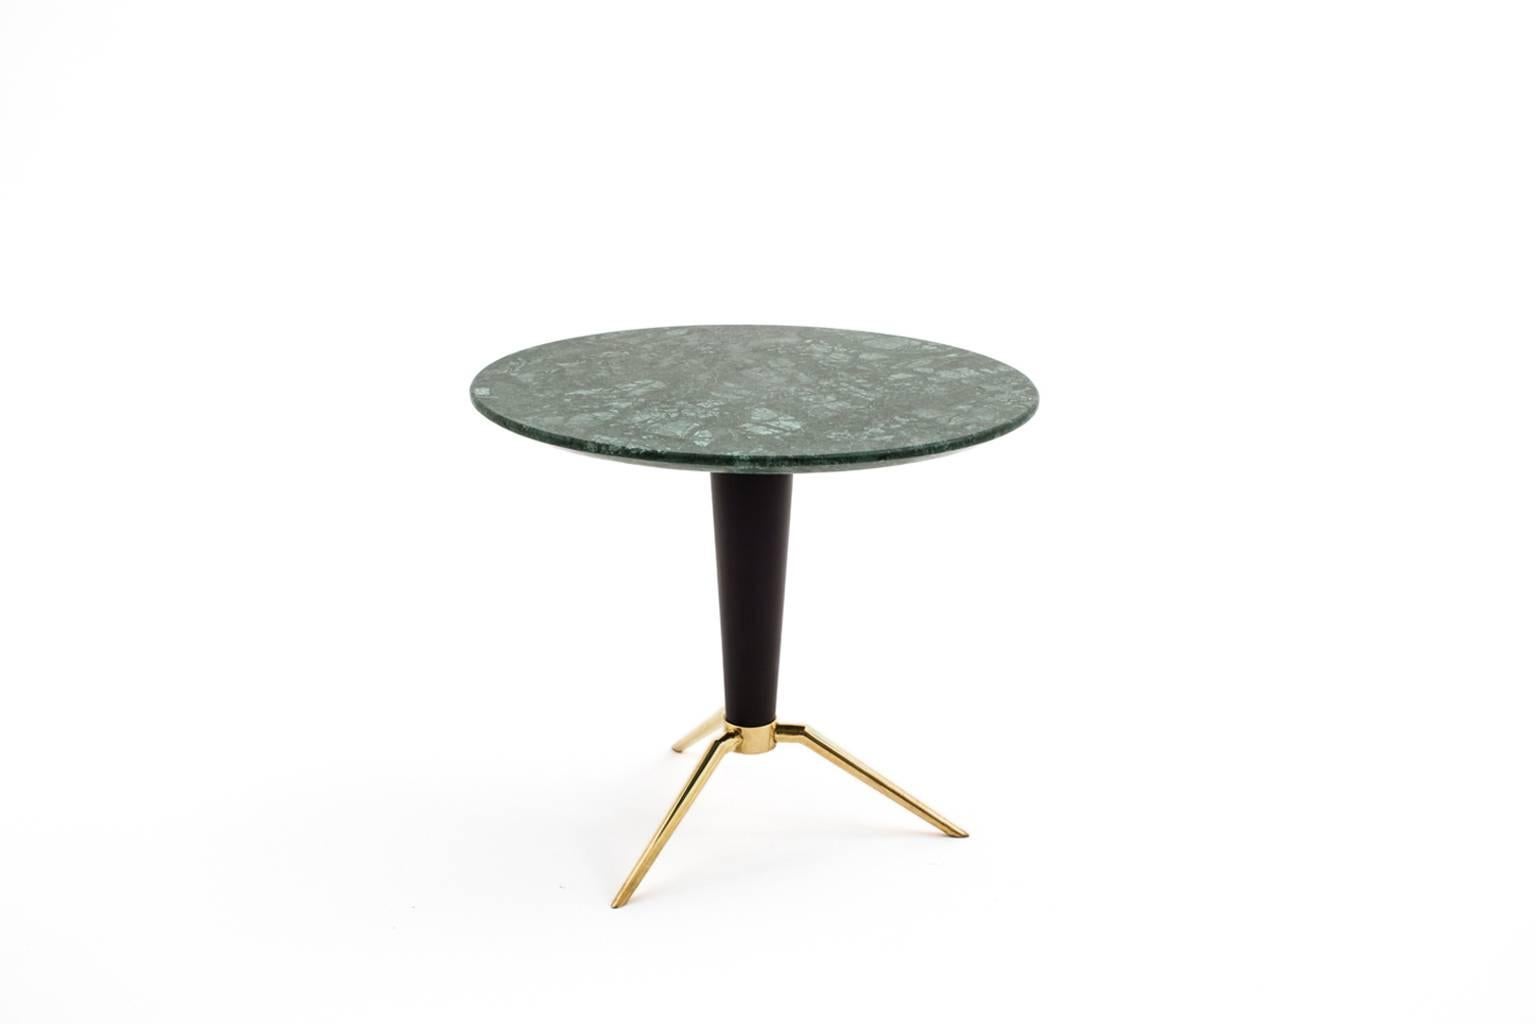 Bronze and marble side table attributed to Melchiorre Bega, Italy 1950s.
Elegant cone-shaped wooden leg with a high quality bronze tripod base and a beautiful green marble top. In excellent condition.
   